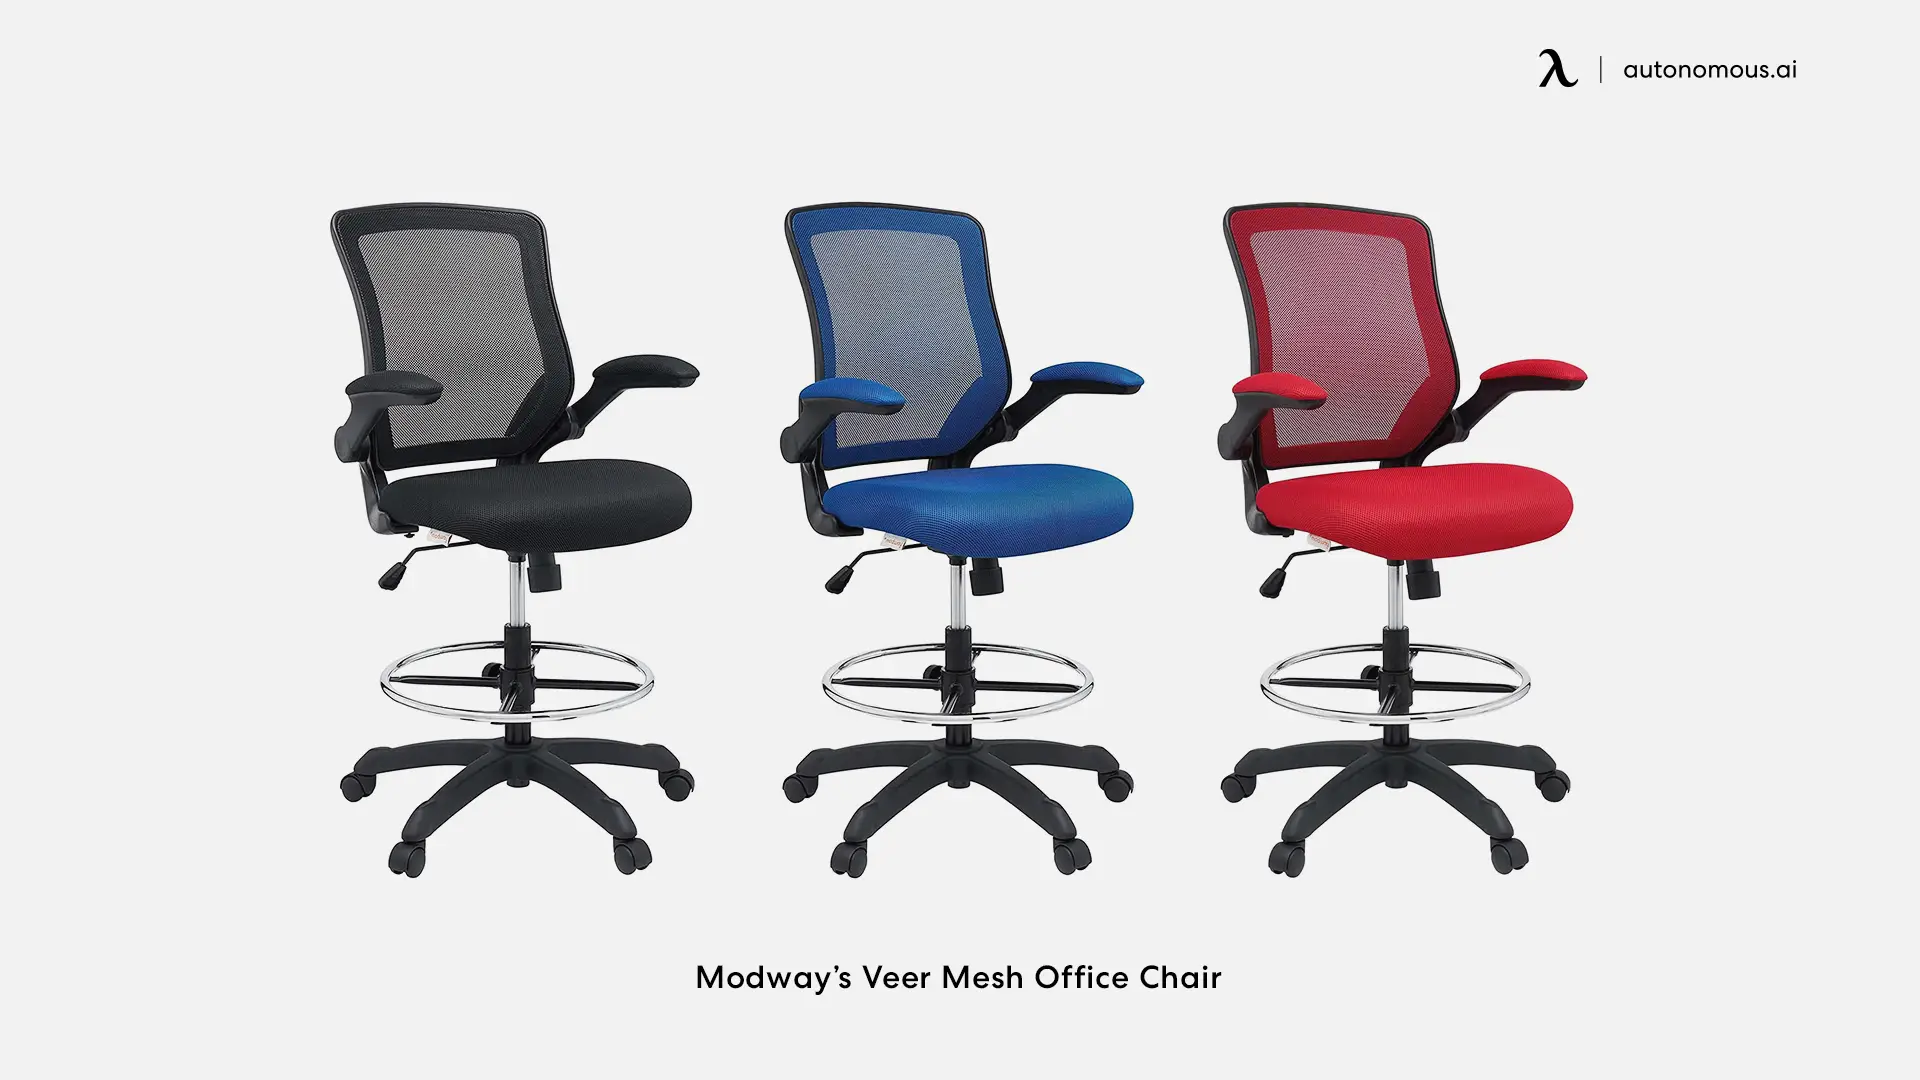 Modway’s Veer Mesh Office Chair